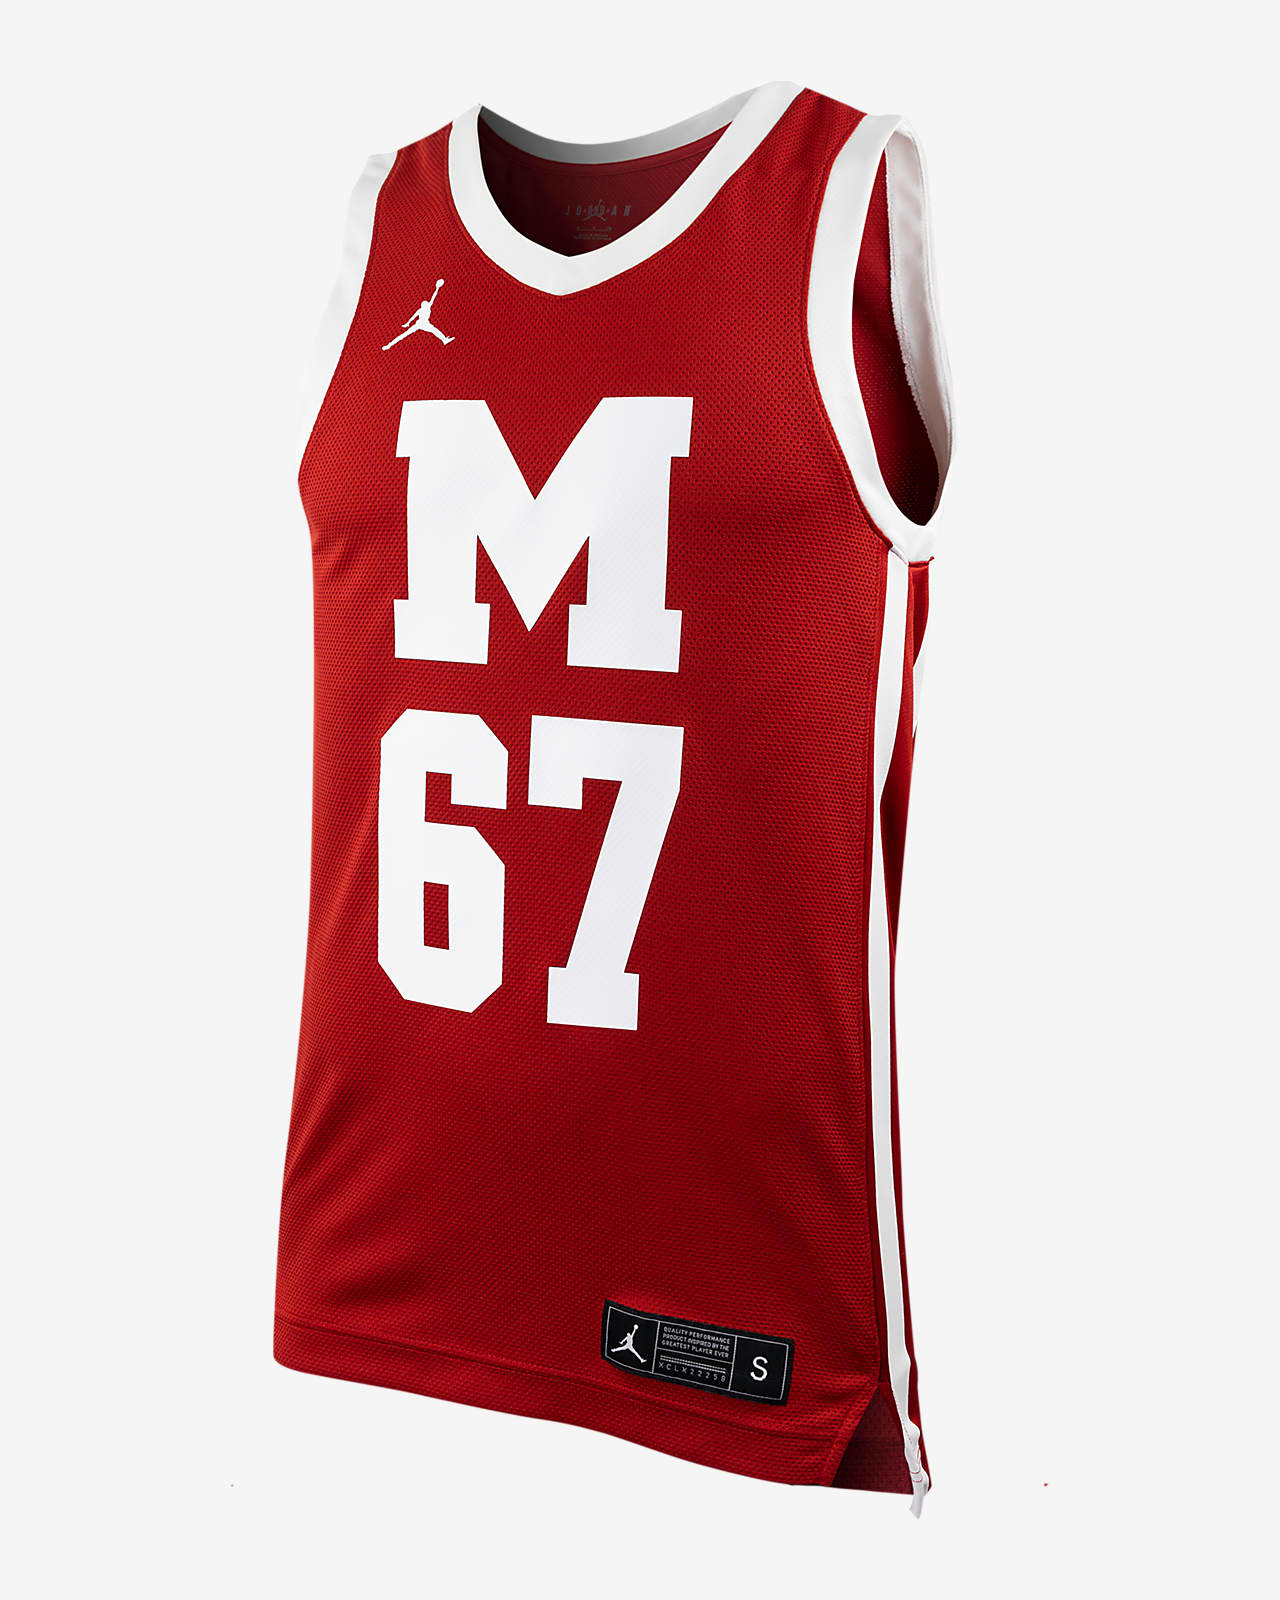 Morehouse Men's College Jersey. Nike.com